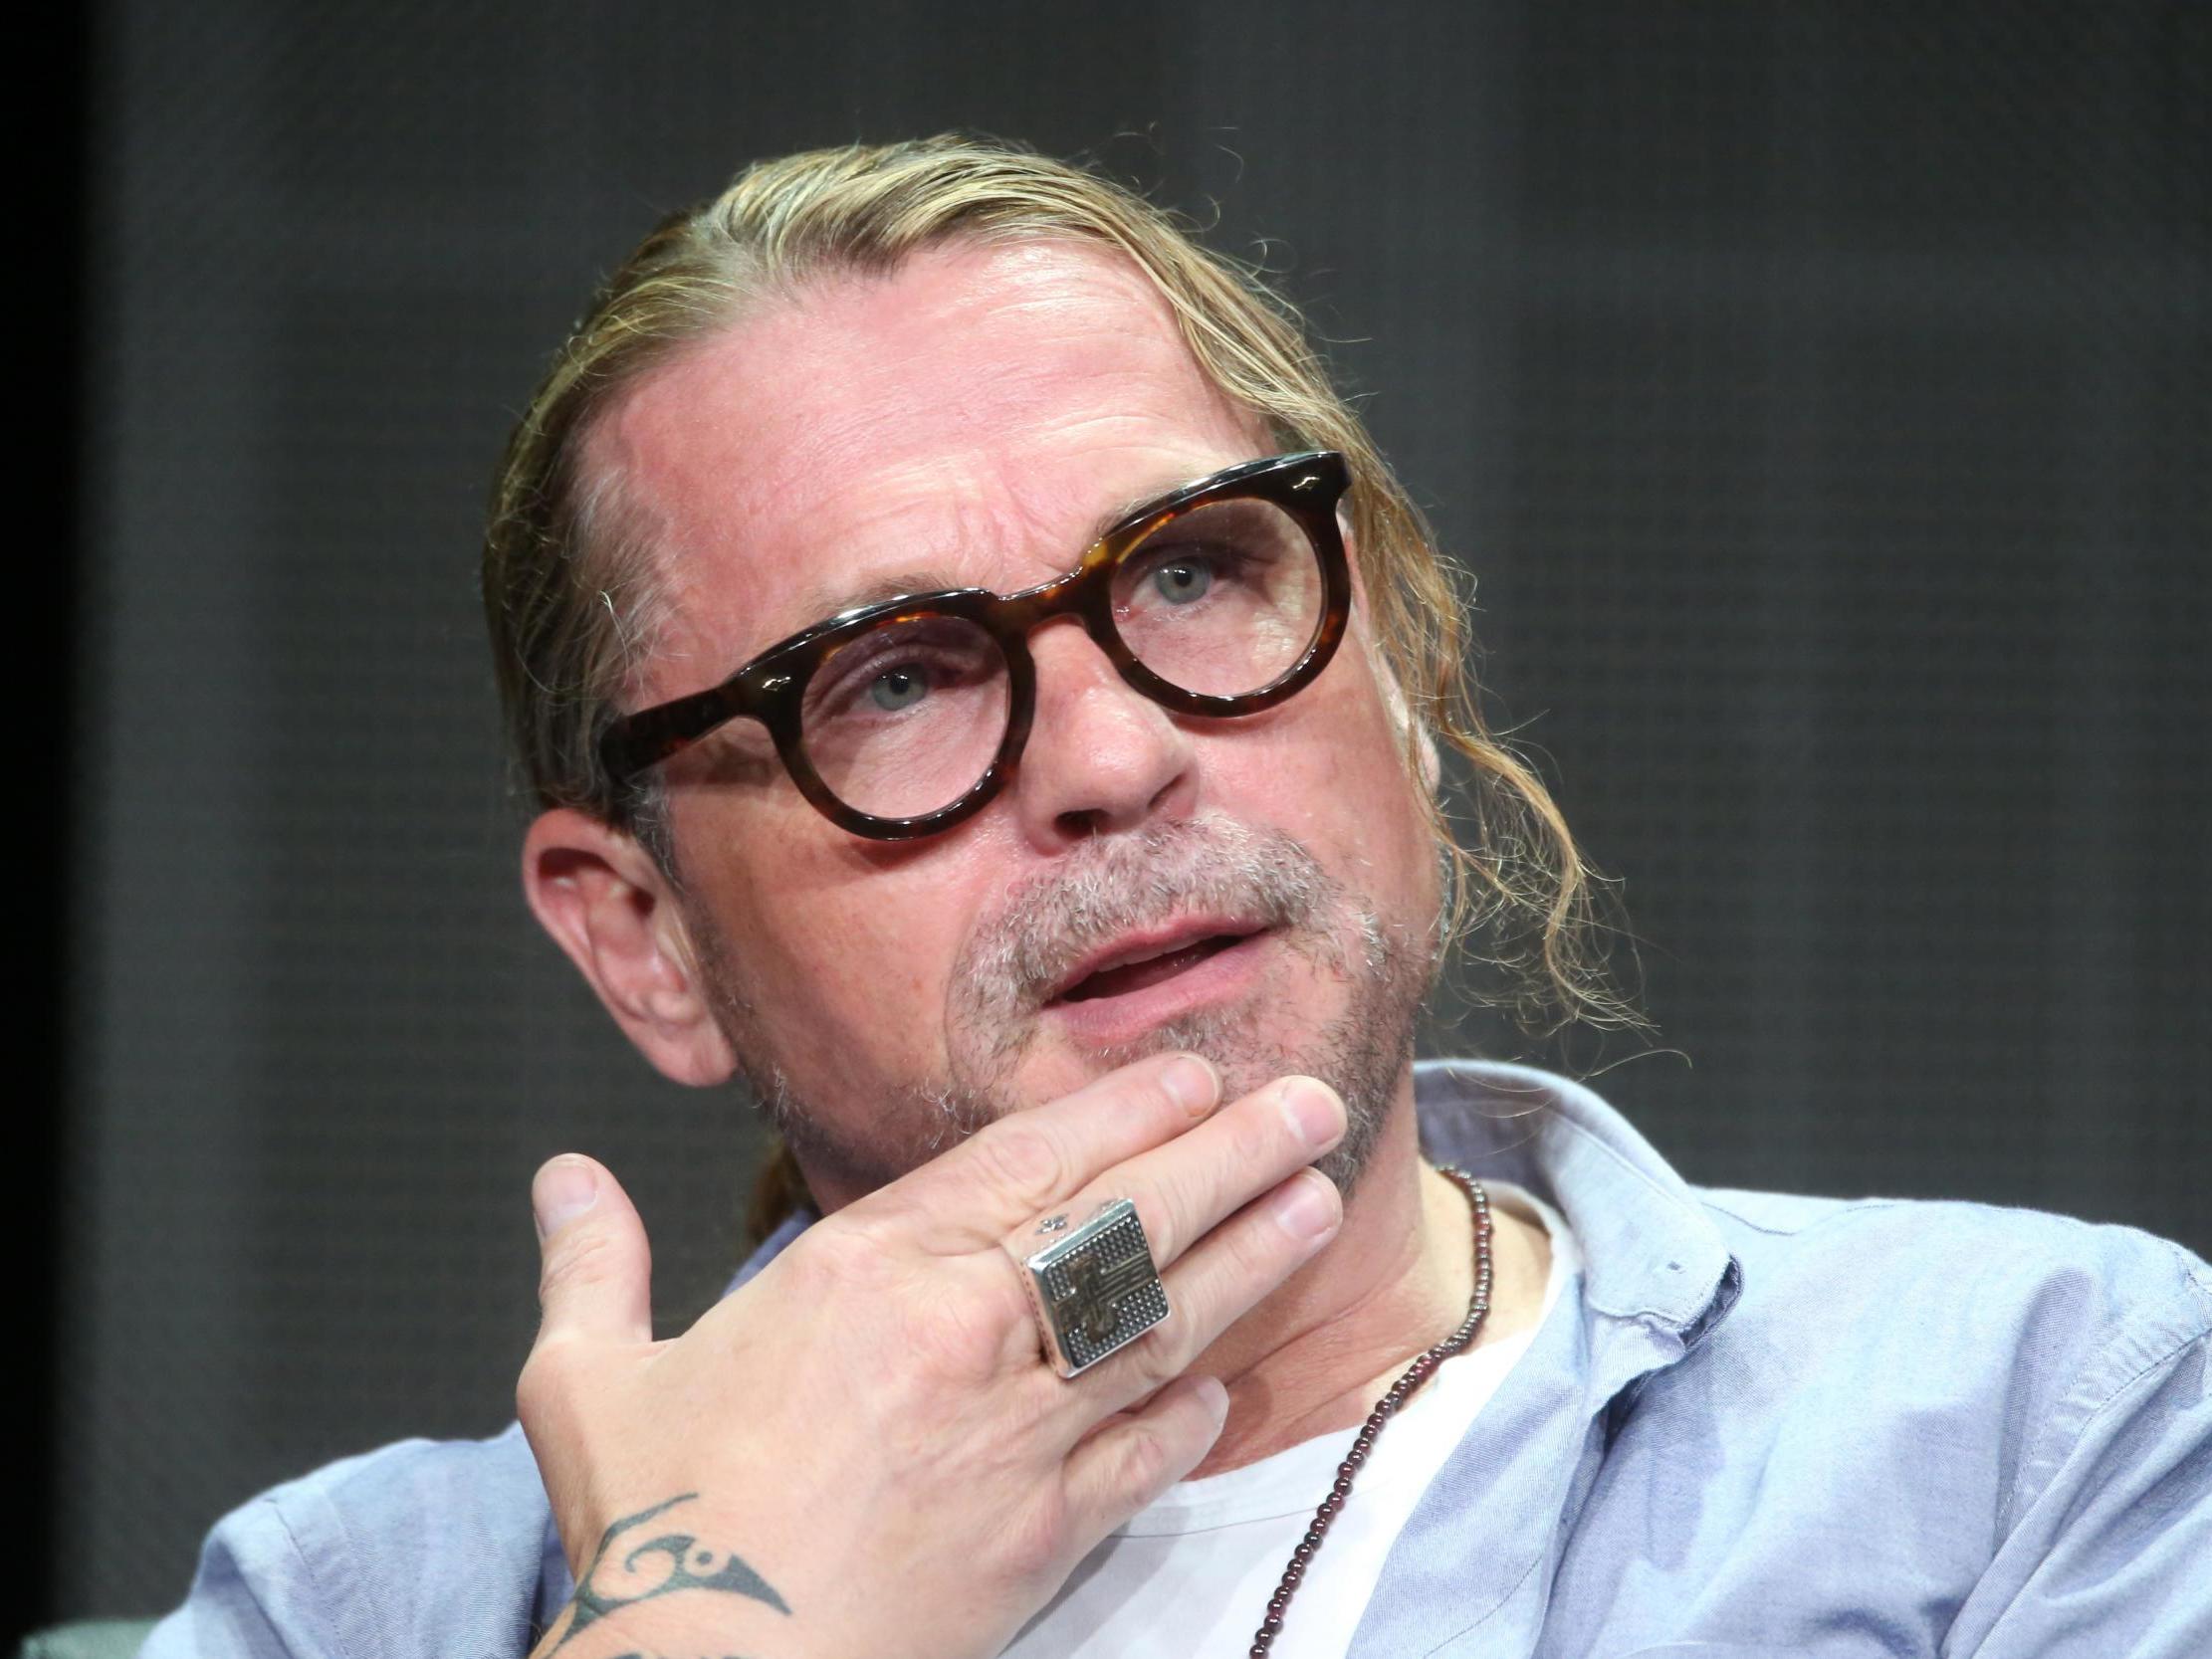 Sons of Anarchy creator Kurt Sutter 'created chaos, confusion and hostility' on-set